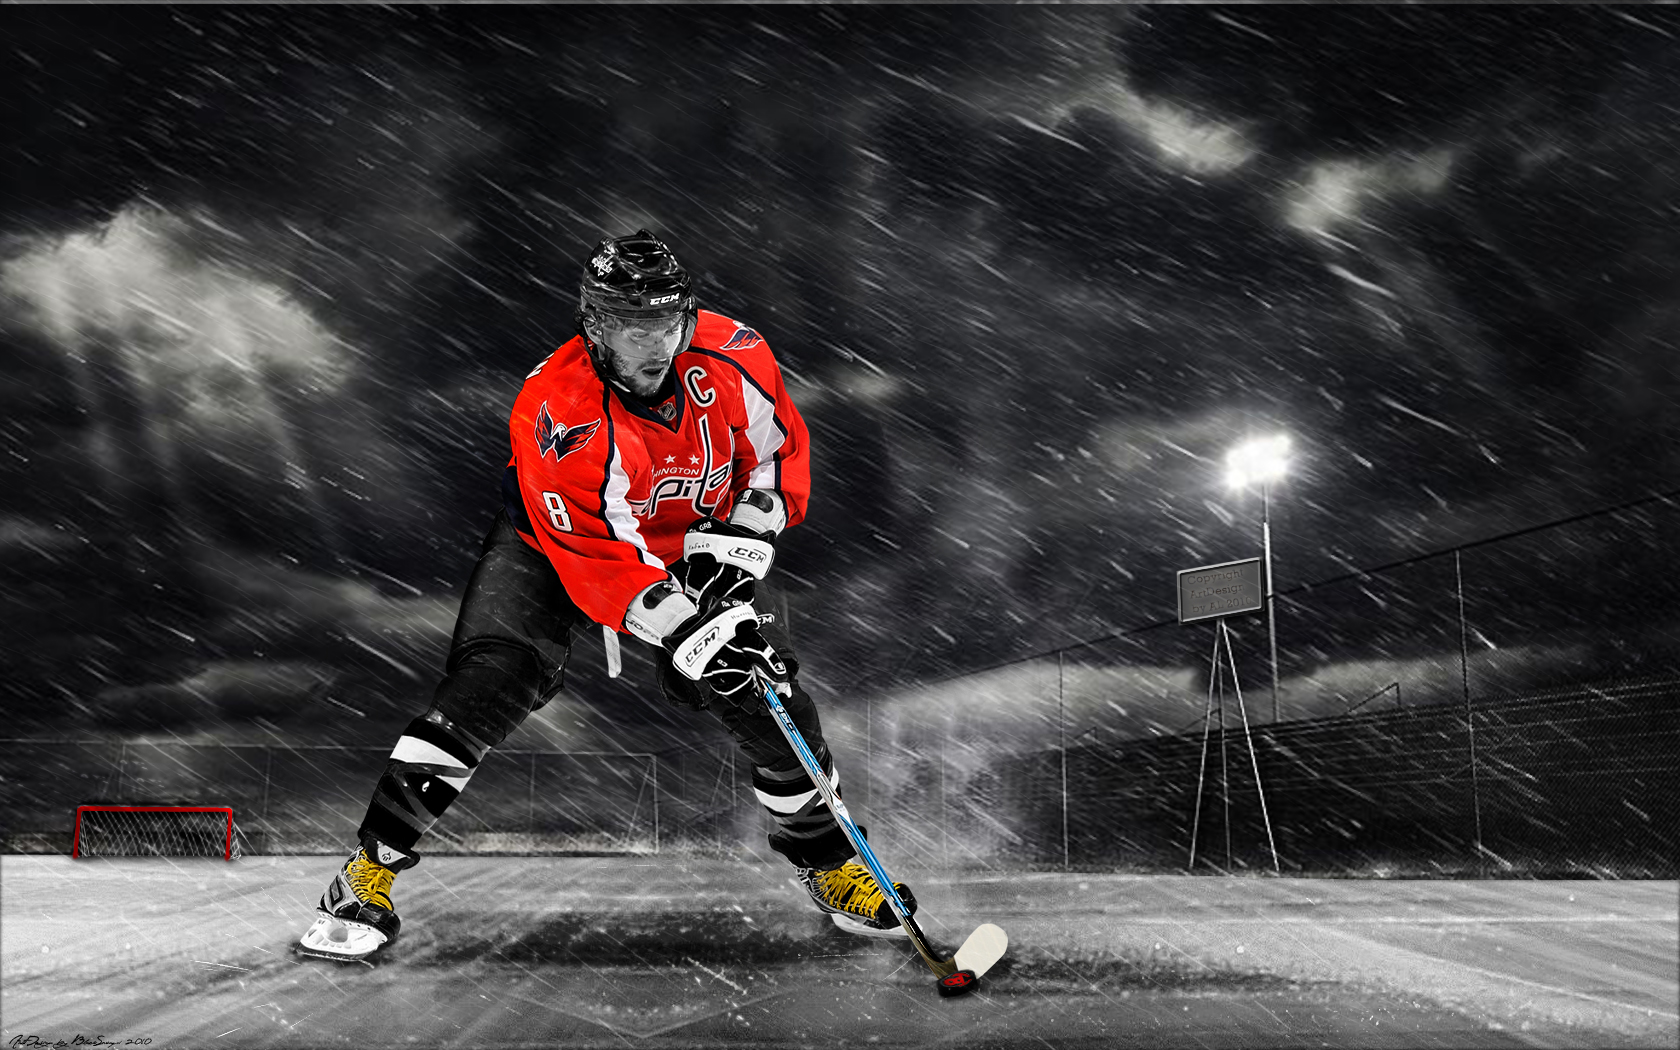 Alexander Ovechkin - Ice Hockey Player Wallpaper for iPhone 6 Plus